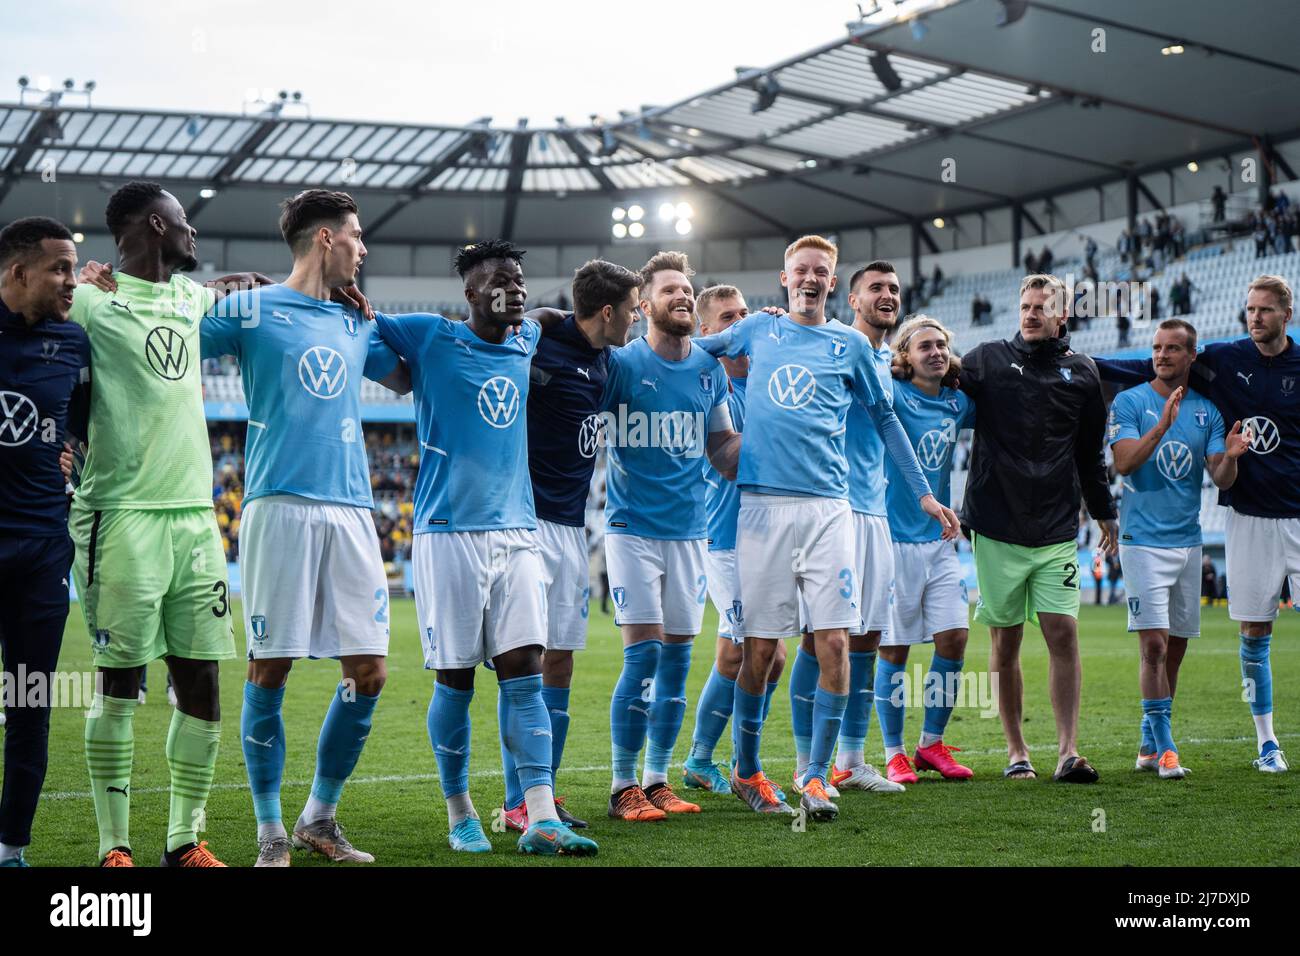 Malmoe, Sweden. 07th, May 2022. The players of Malmoe FF celebrate the victory with the fans after the Allsvenskan match between Malmoe FF and Mjallby at Eleda Stadion in Malmoe. (Photo credit: Gonzales Photo - Joe Miller). Stock Photo